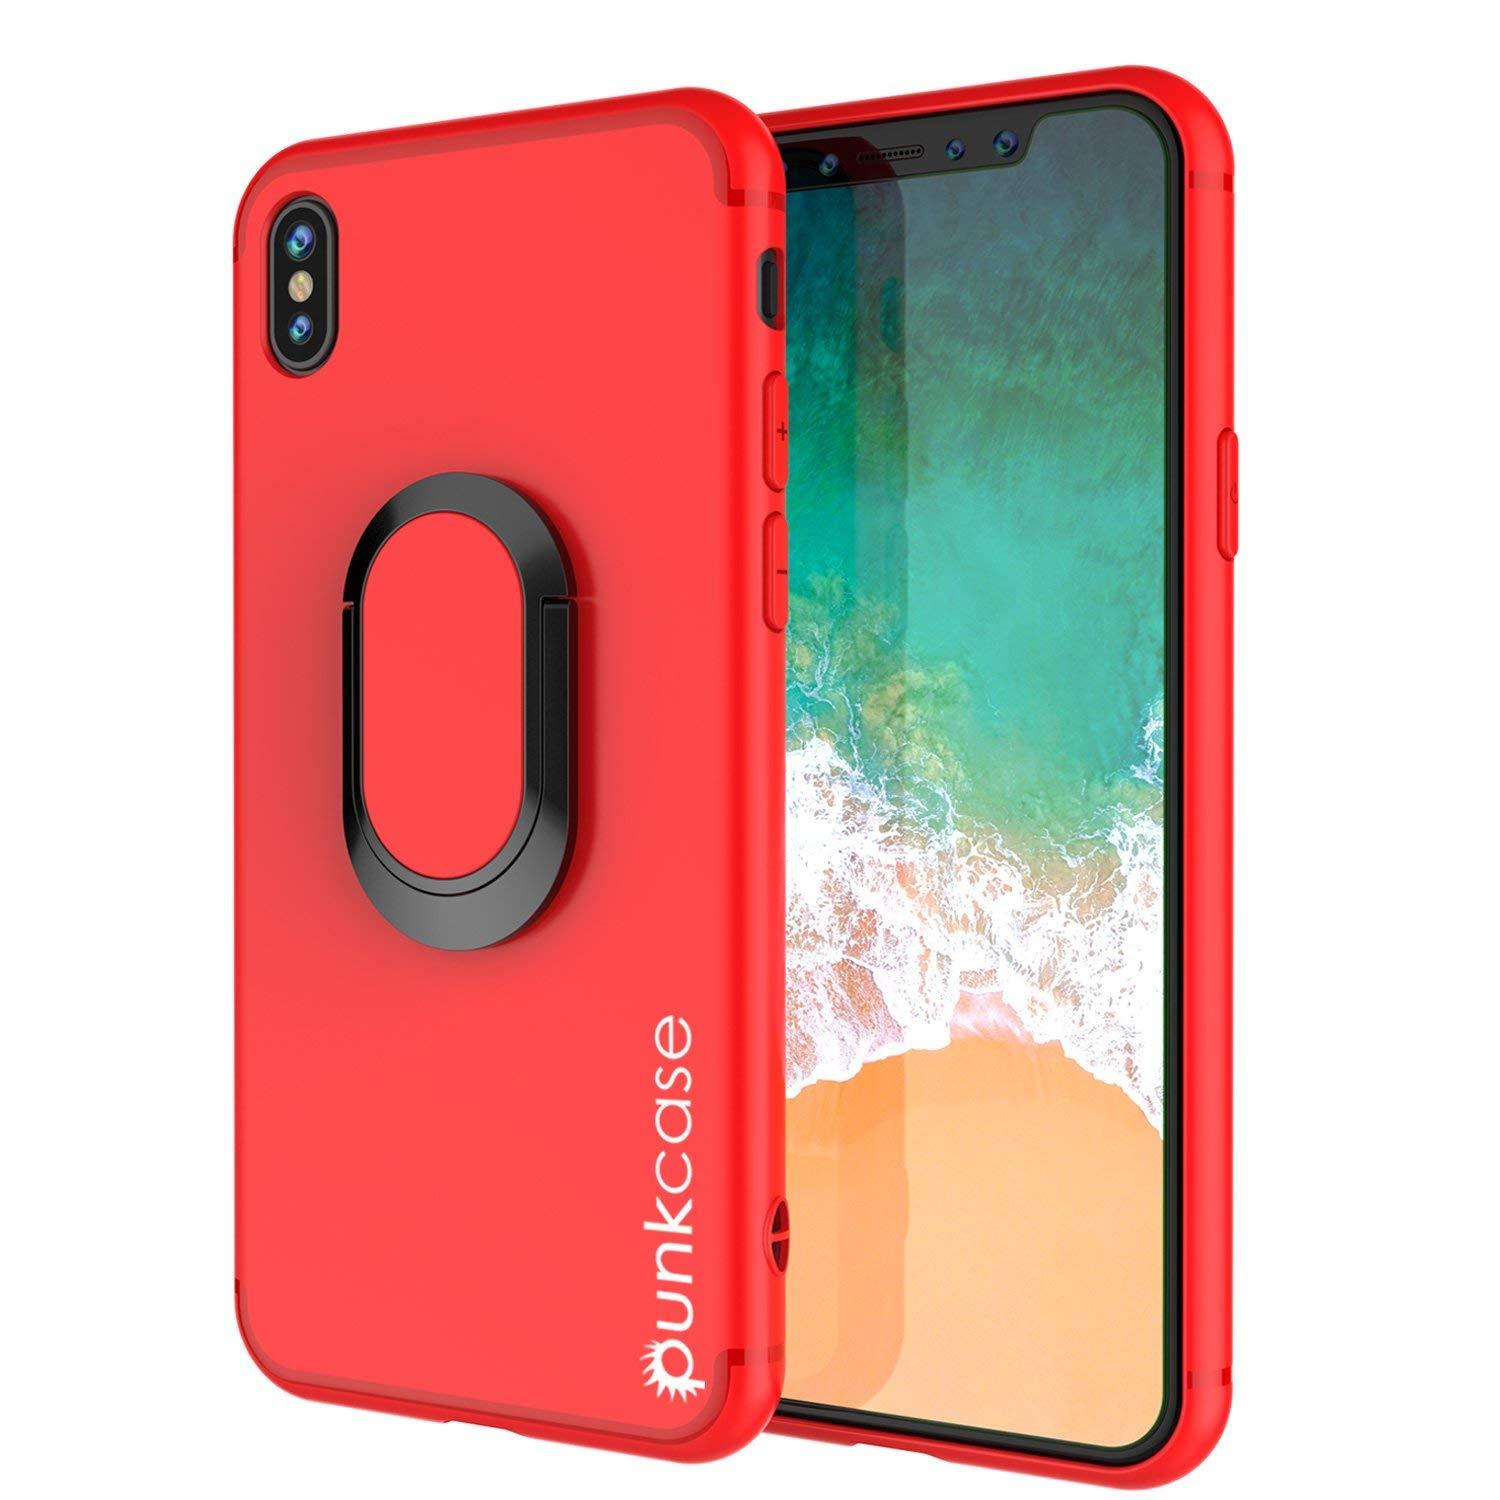 iPhone XR Case, Punkcase Magnetix Protective TPU Cover W/ Kickstand, Tempered Glass Screen Protector [Red] - PunkCase NZ